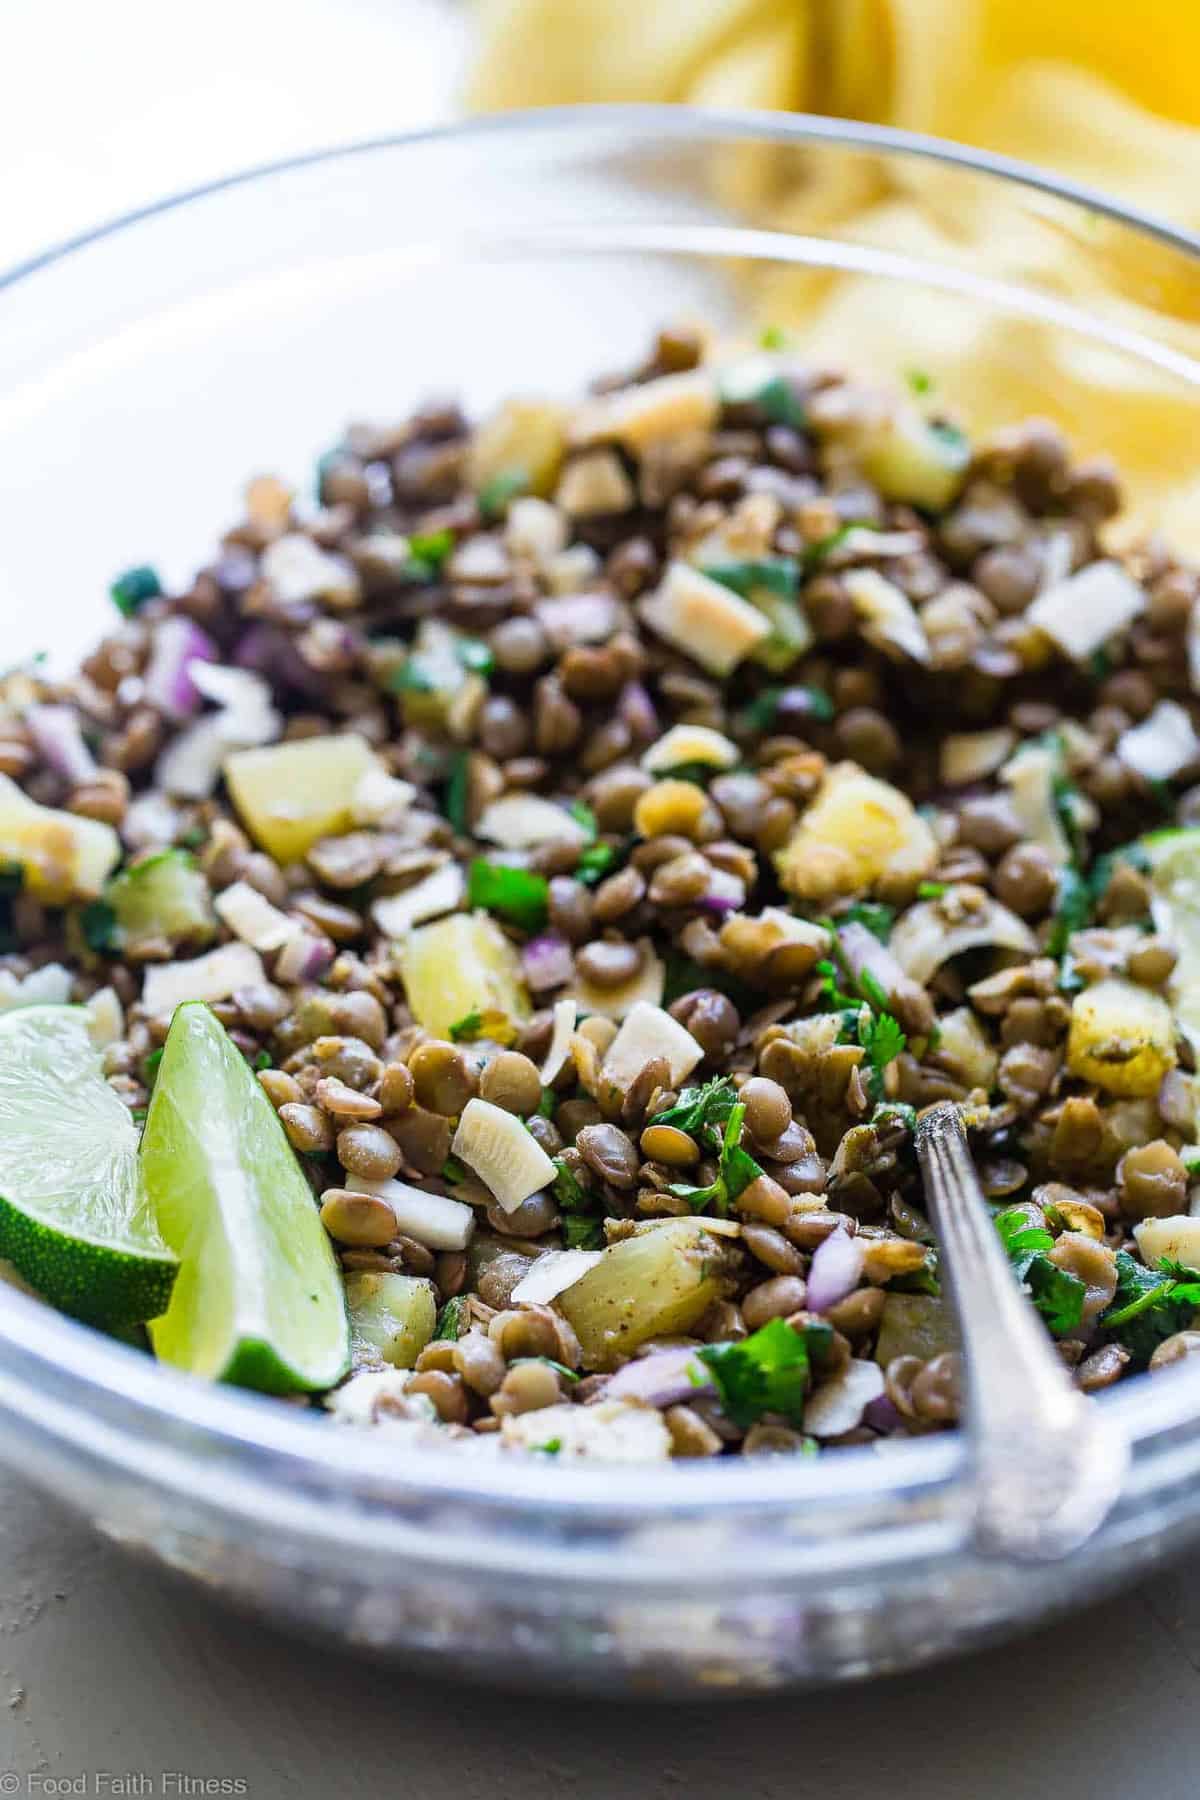 Caribbean Lentil Salad - This easy, healthy cold lentil salad recipe has a Caribbean-inspired, tropical twist! It's a vegan-friendly, gluten free meal that's packed with plant-based protein! Make-ahead friendly and great for meal prep! | #Foodfaithfitness | #Vegan #Healthy #Plantbased #Salad #Healthy